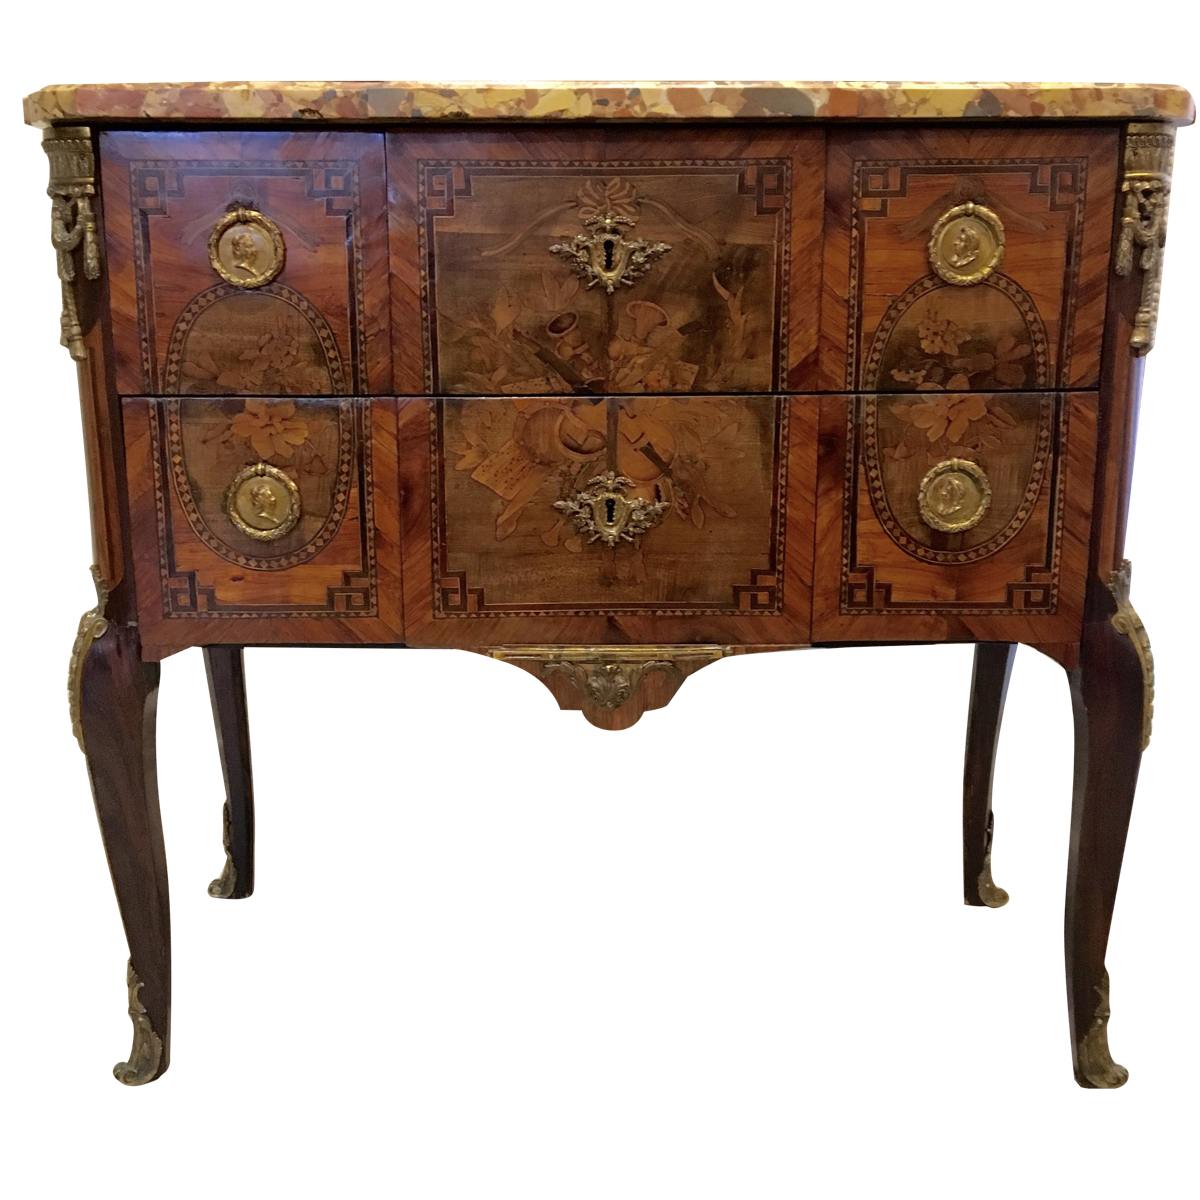 ON HOLD - Louis XVI two-drawer commode signed Francois Rubestuck, c. 1765 - Helen Storey Antiques